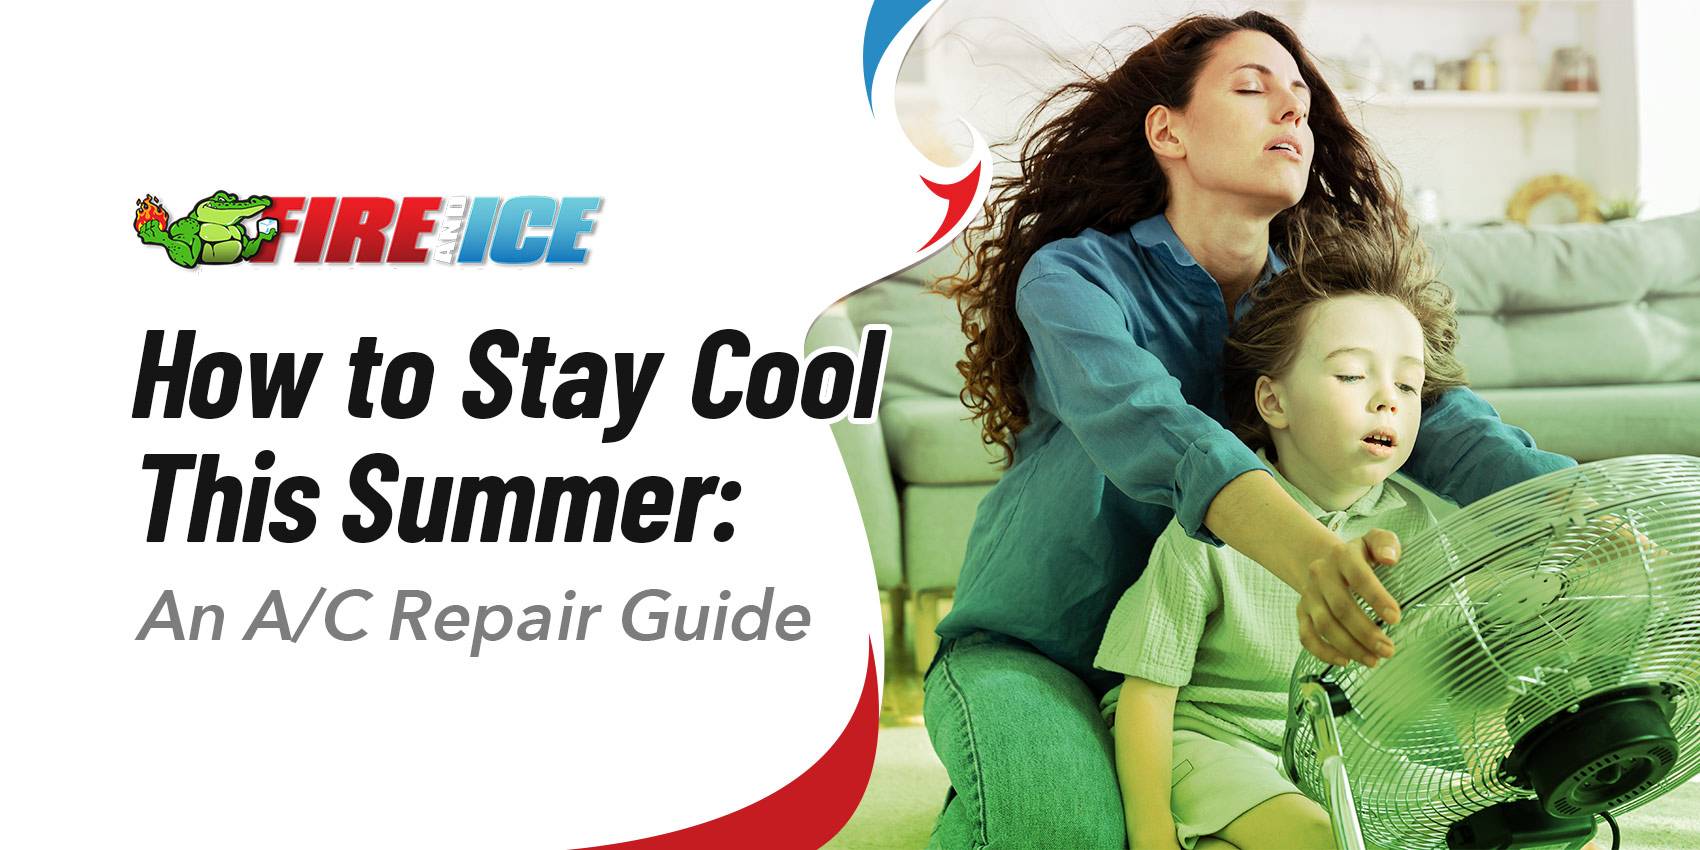 how to stay cool this summer: an A/C repair guide in Brusly, LA in a woman hold her child in front of the fan